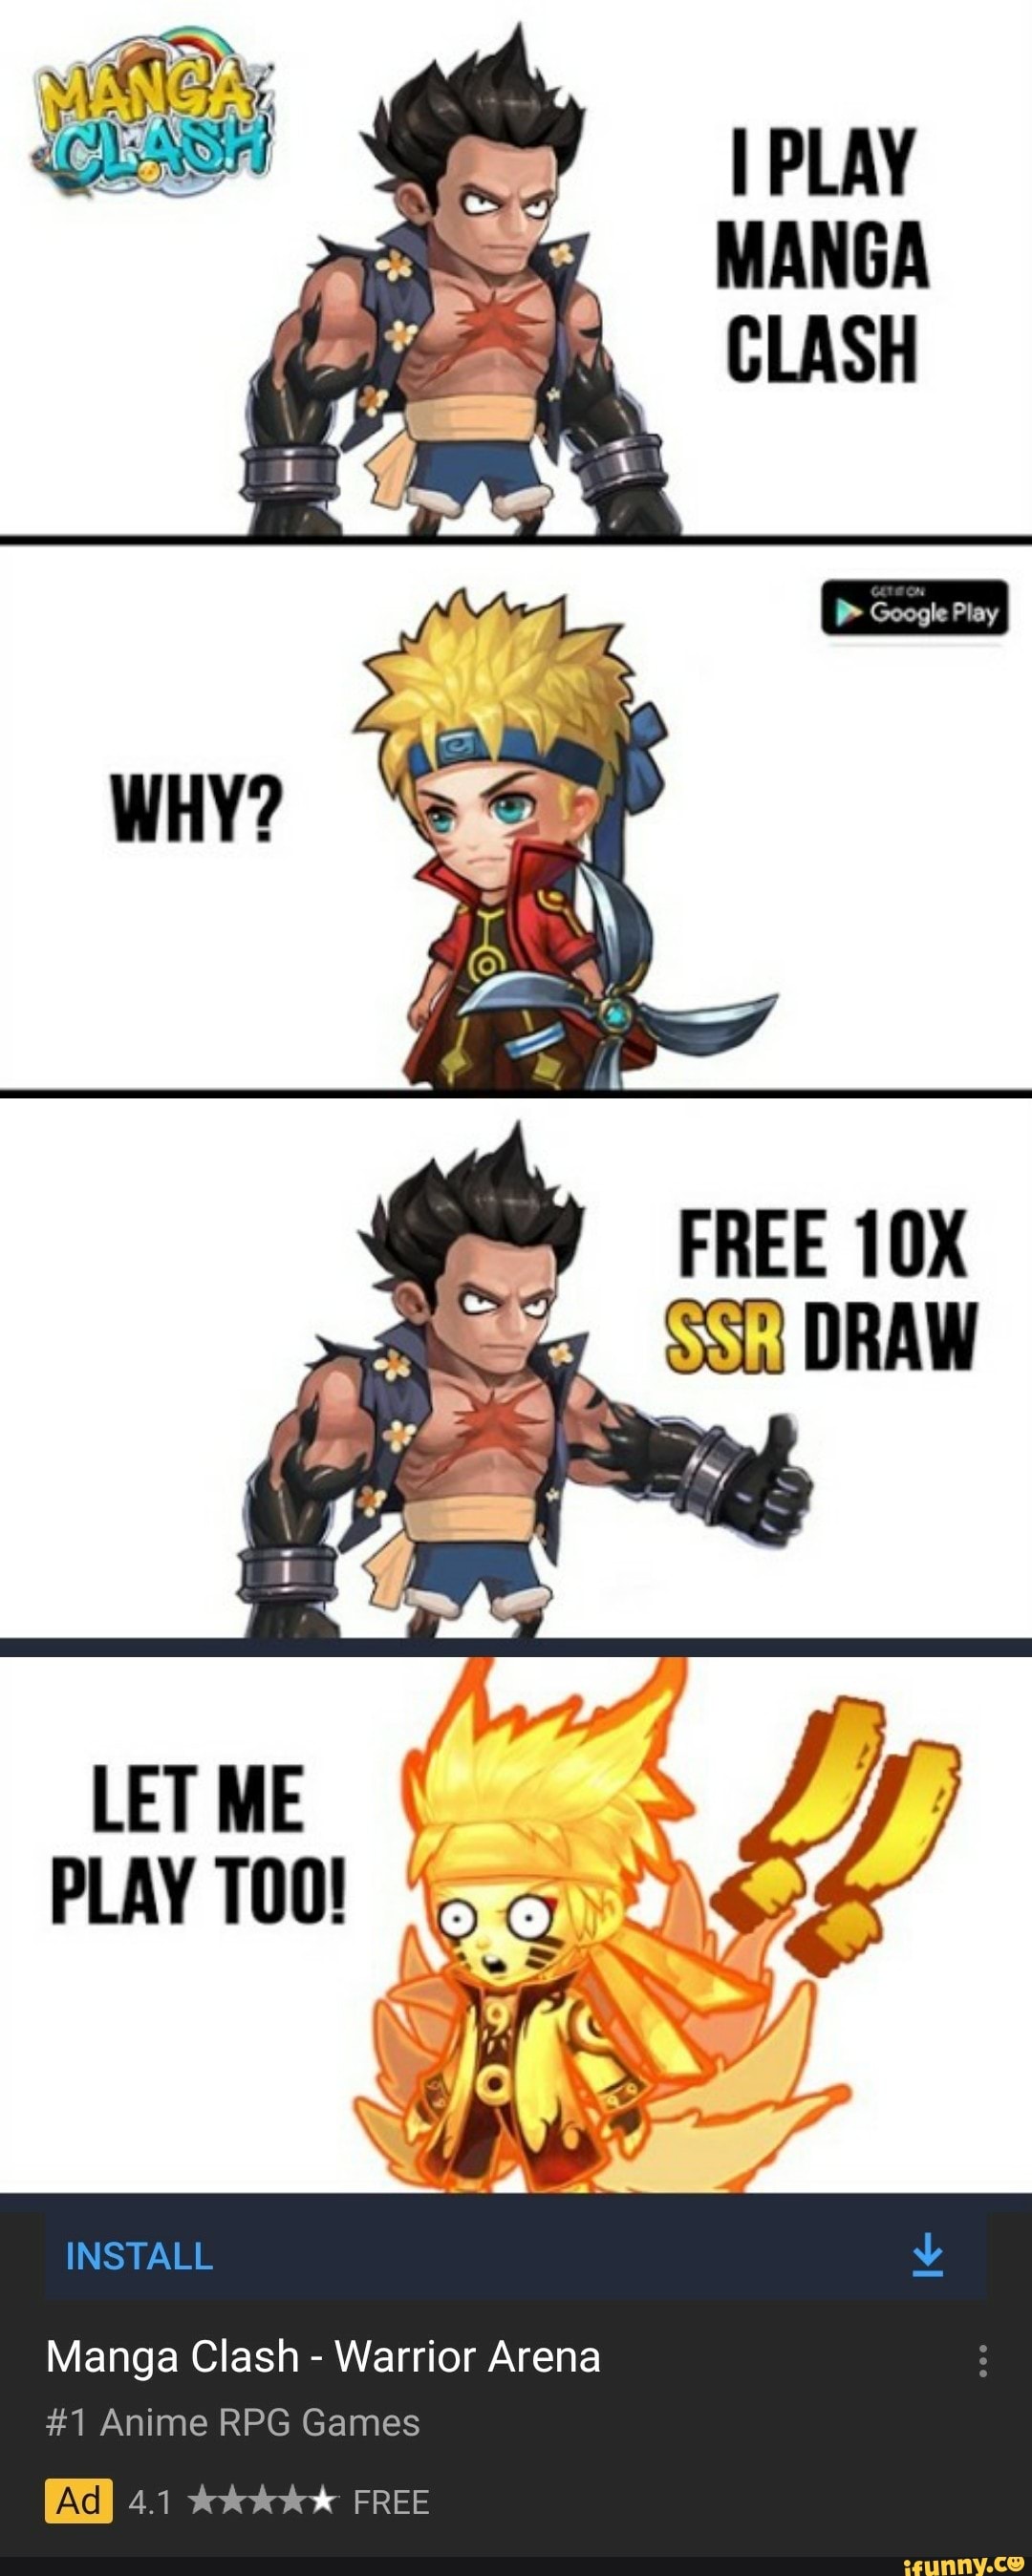 PLAY CLASH FREE DRAW LET ME PLAY TOO! INSTALL Manga Clash - Warrior Arena  #1 Anime RPG Games  FREE Ad 